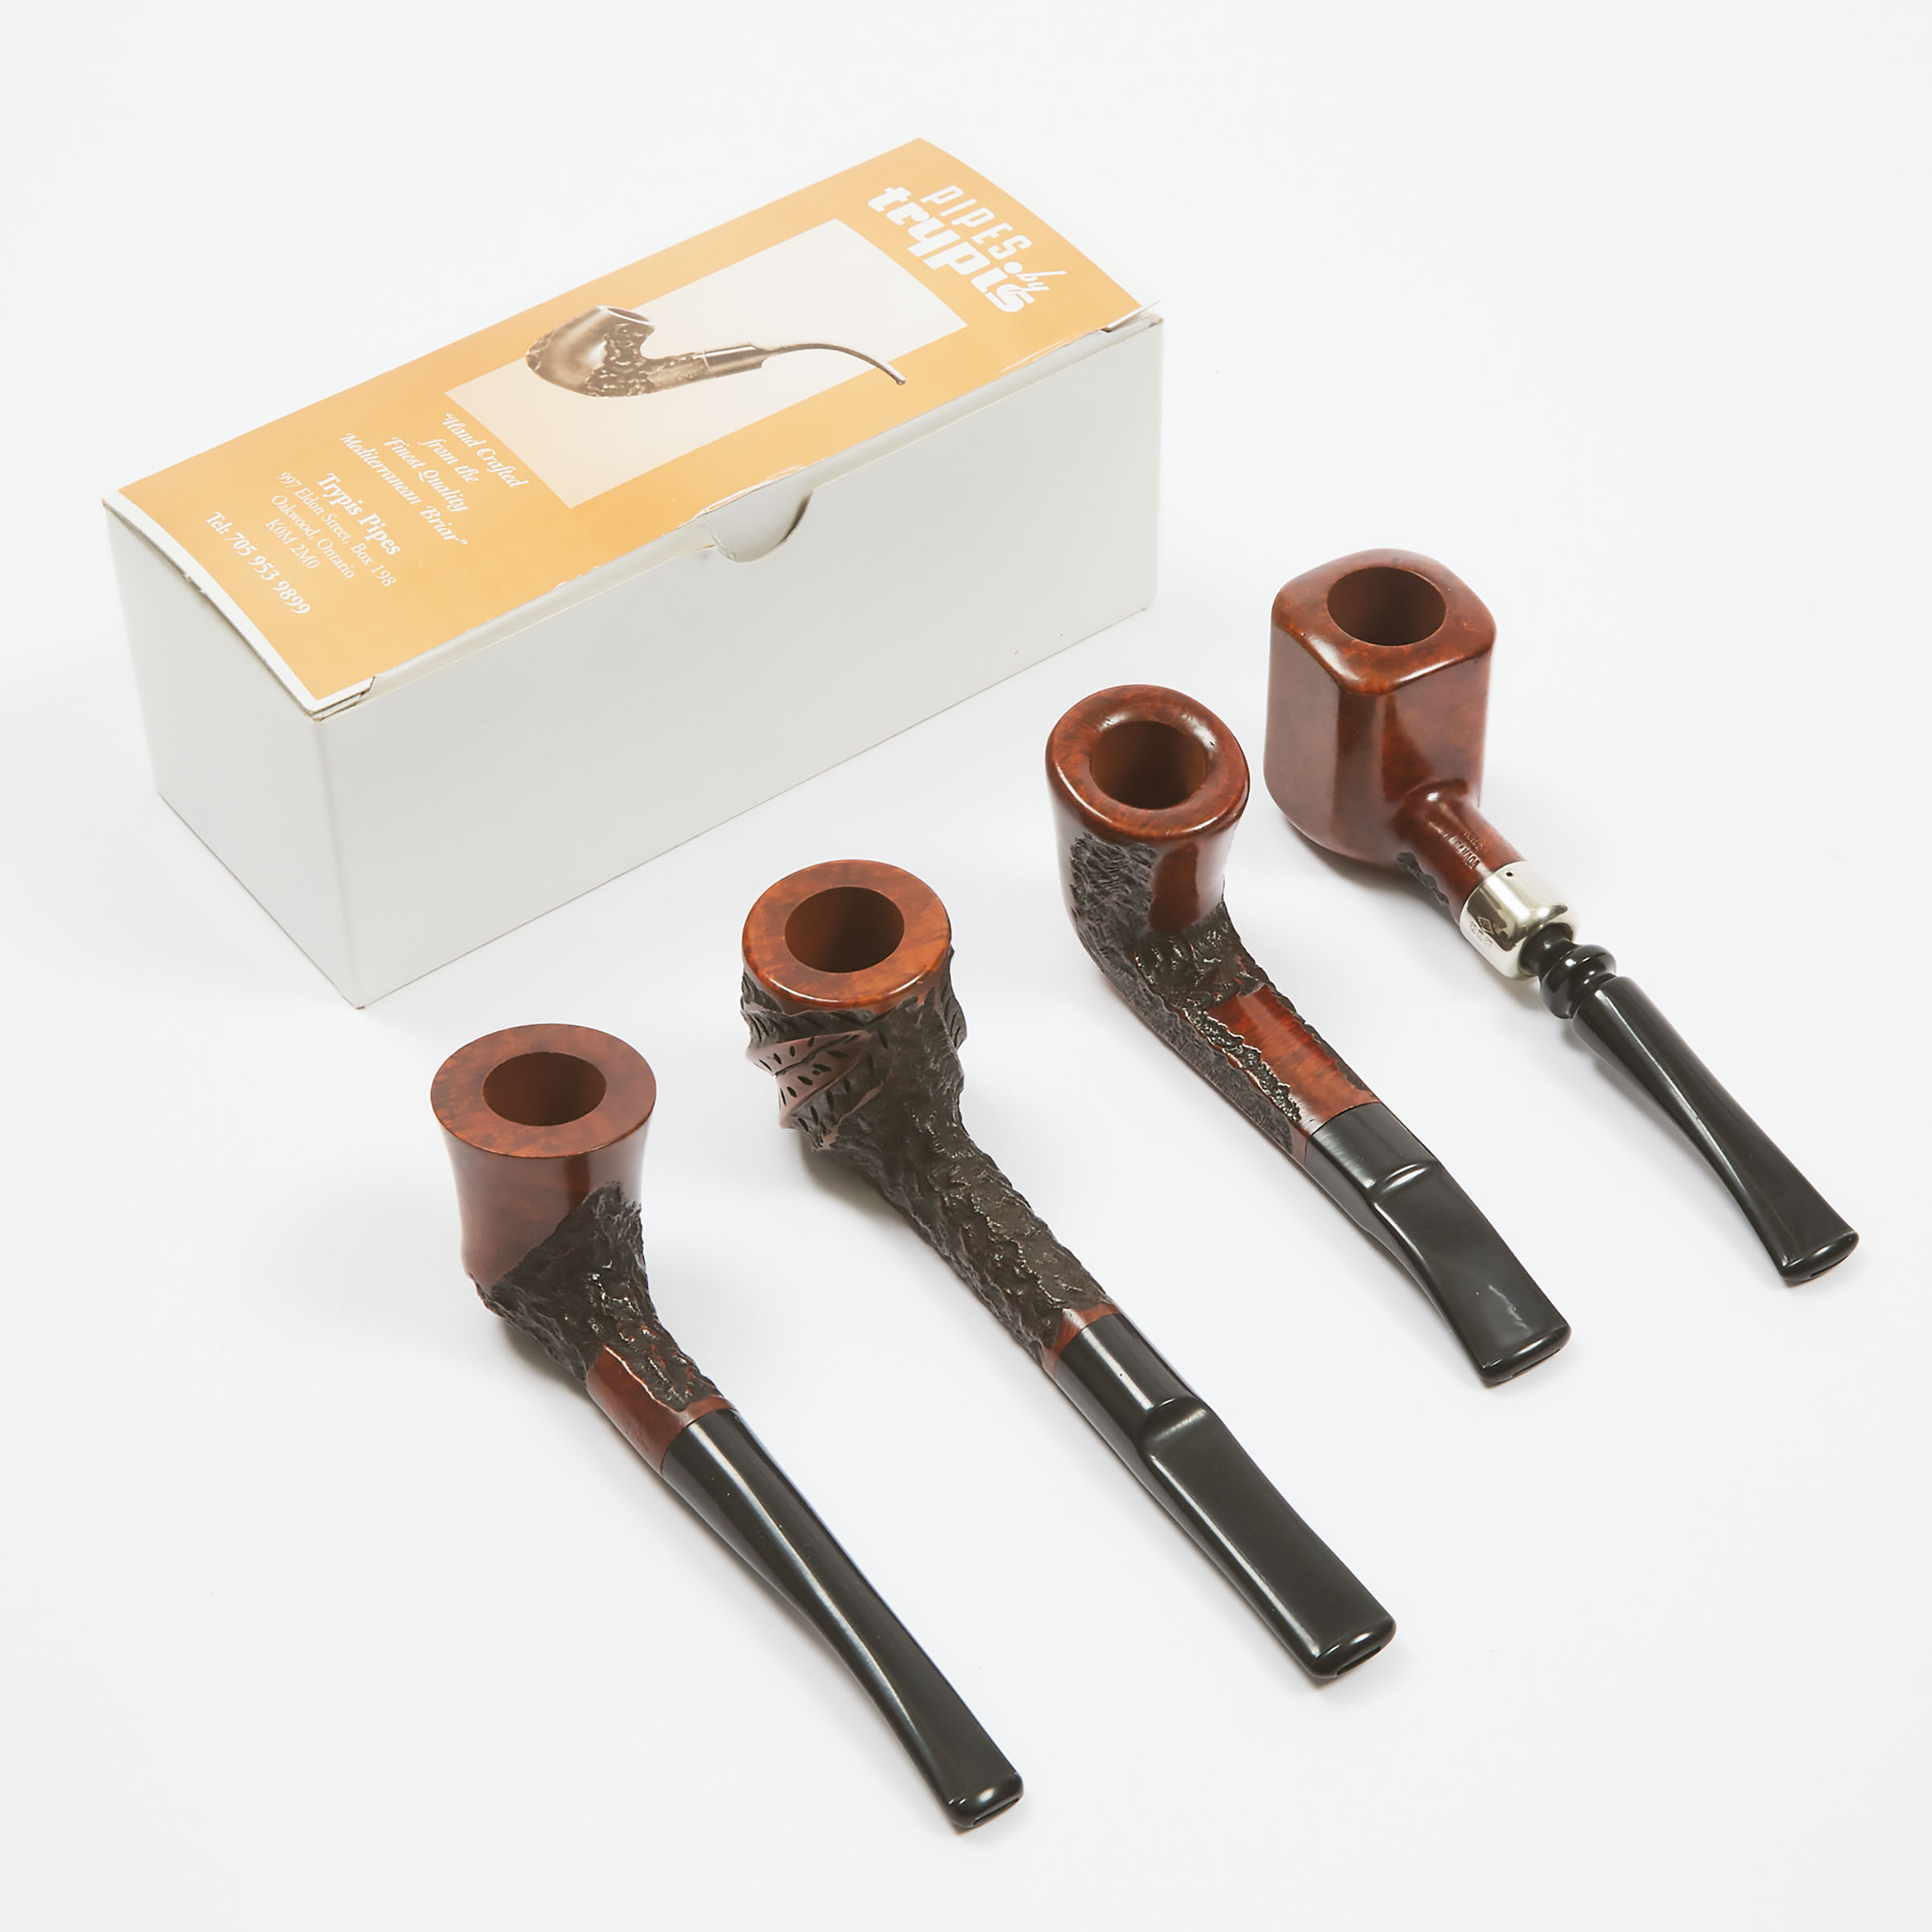 Four Tobacco Pipes by Trypis, Oakwood,